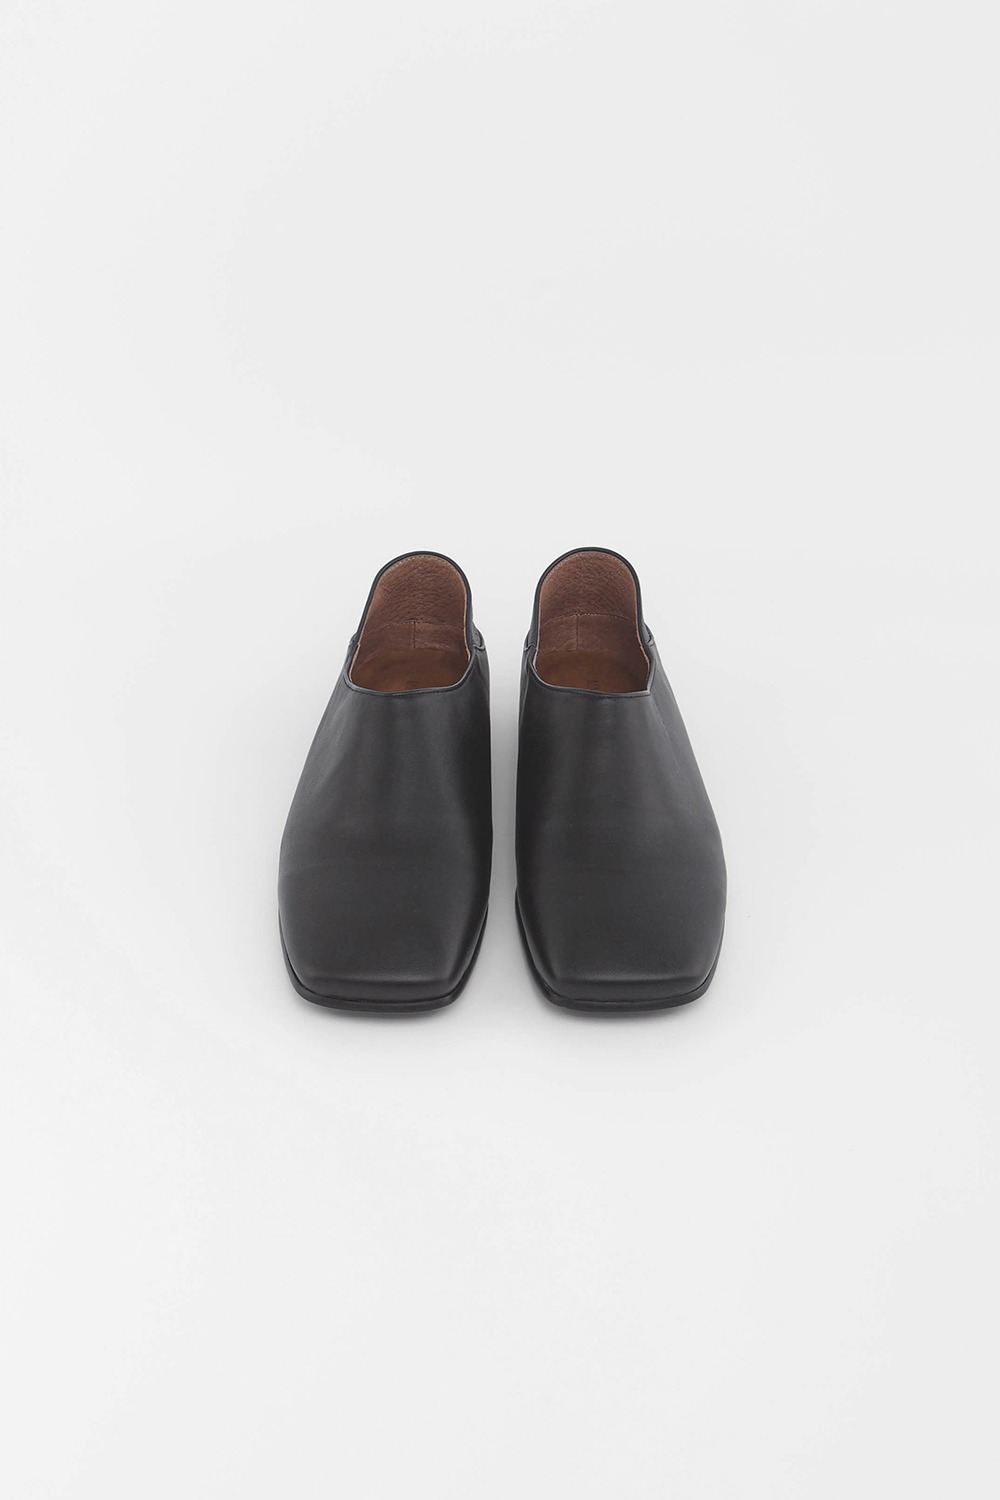 MINIMAL Italy Leather Fold-Back Loafers_Black